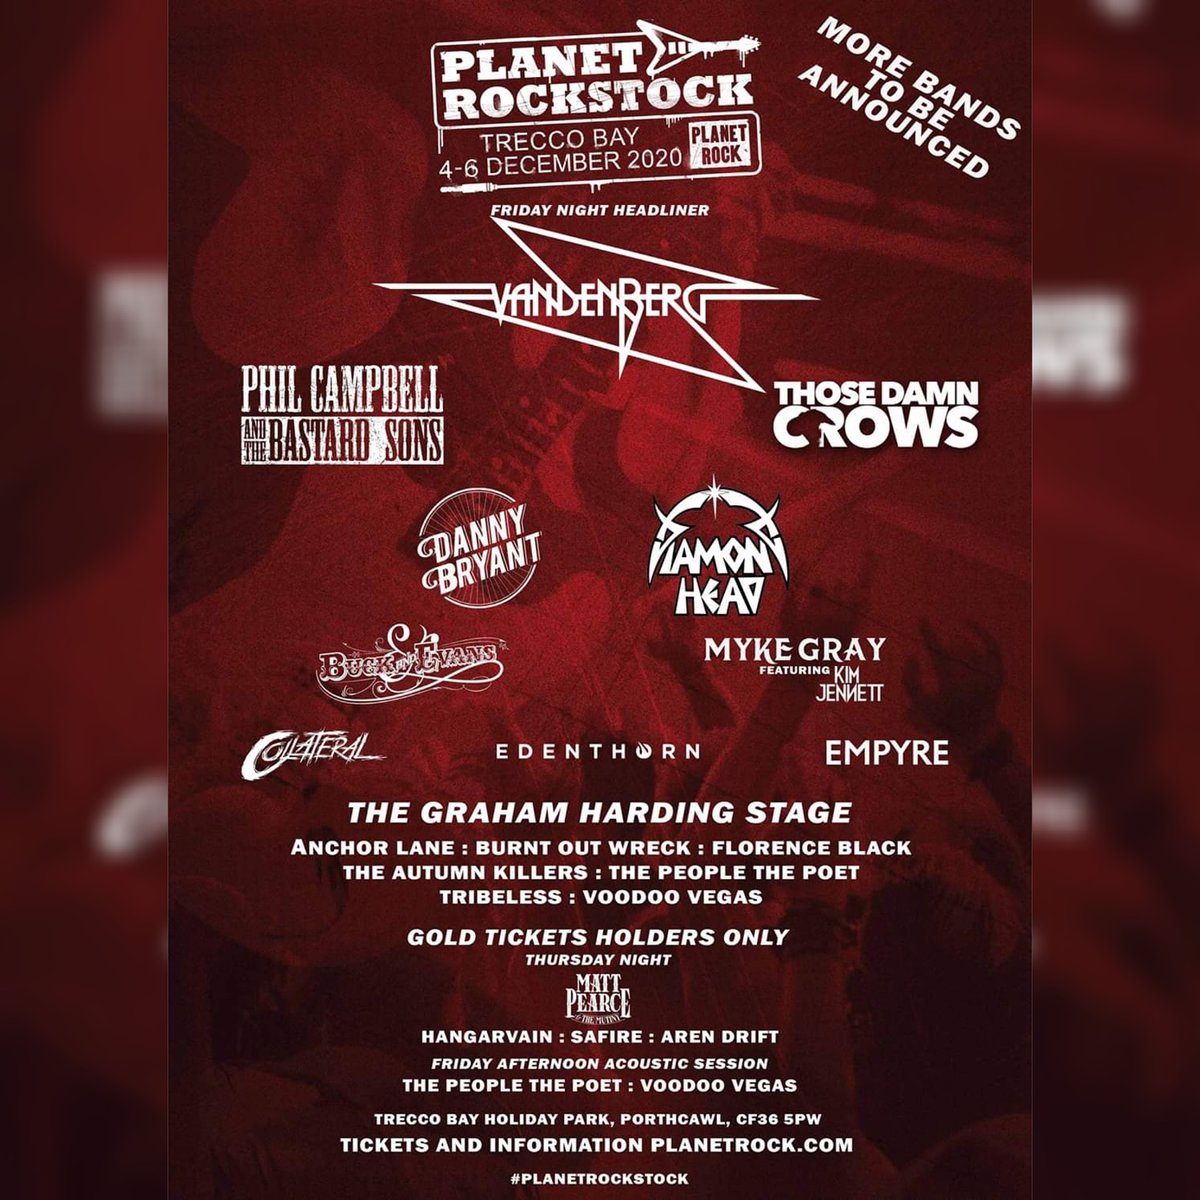 Just announced: Collateral will be on the Main Stage at this years Planet Rock Stock. Weekend Tickets with accommodation to Planet Rockstock 2020 go on sale at 9am on Friday 1st May.
#Collateral #PlanetRockStock #Mainstage @PlanetRockRadio